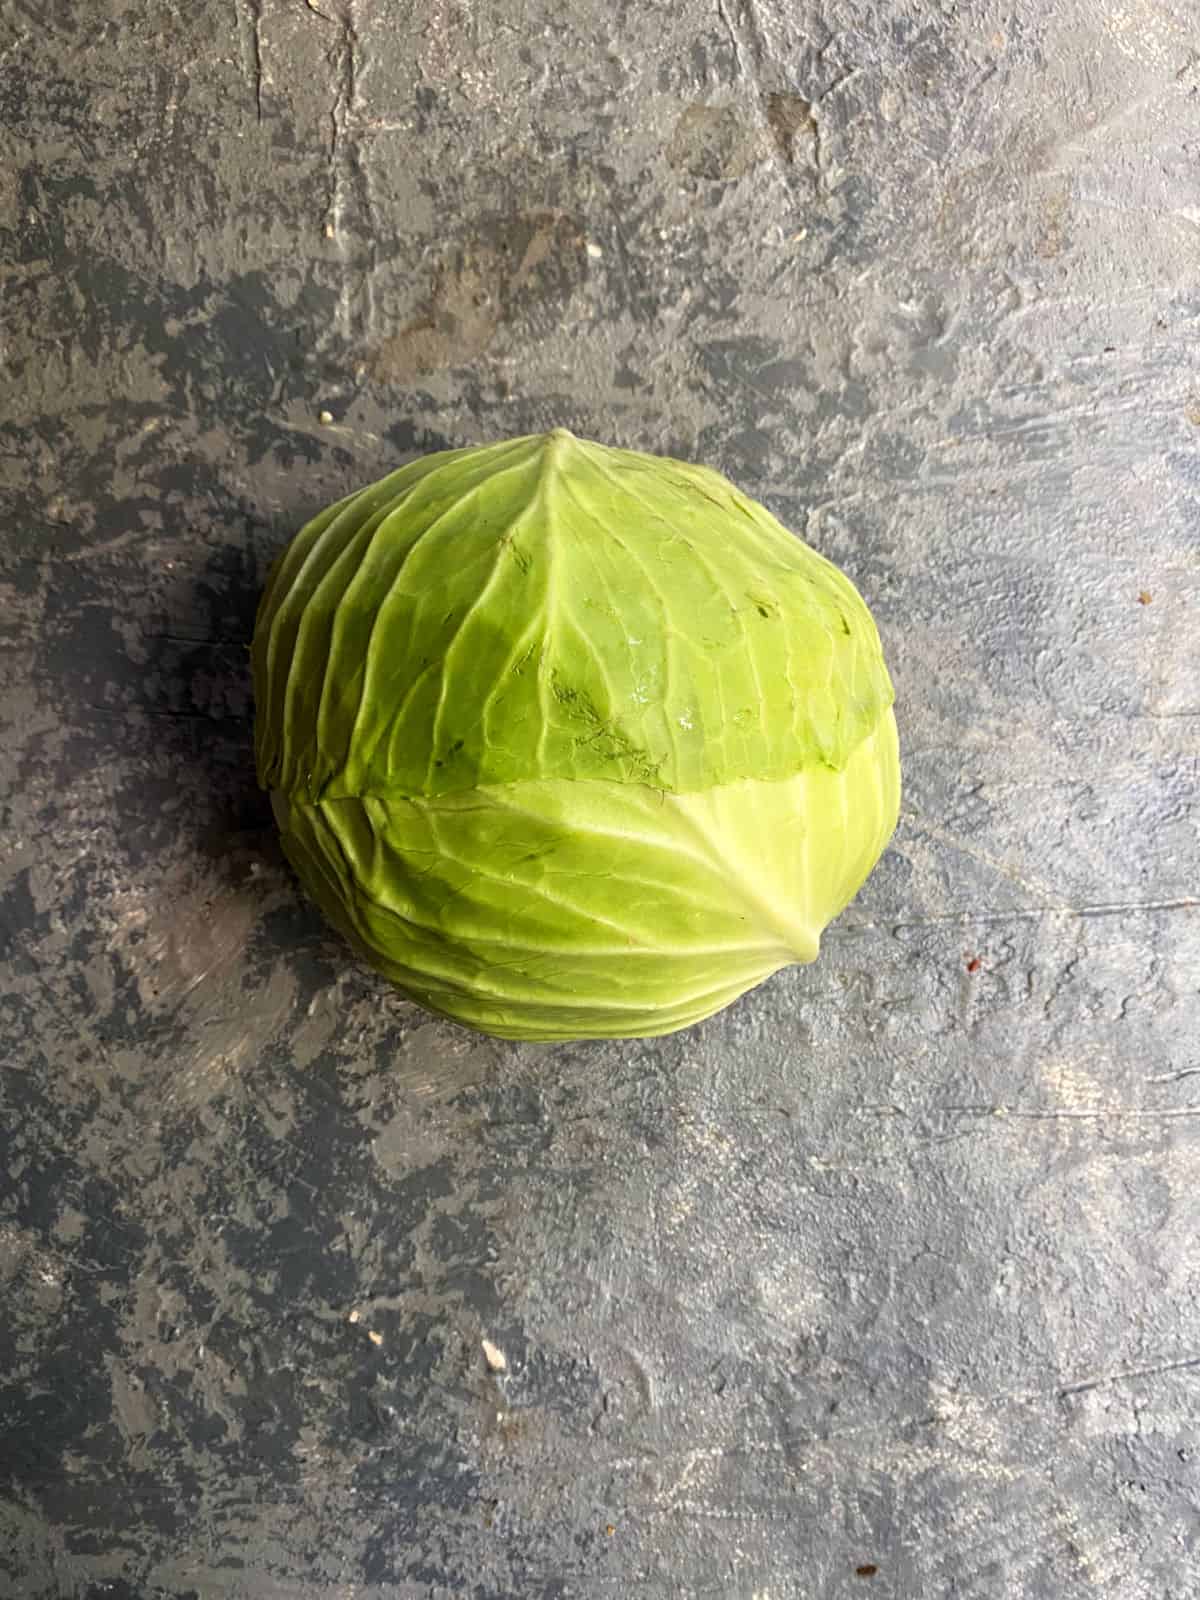 A full head of cabbage